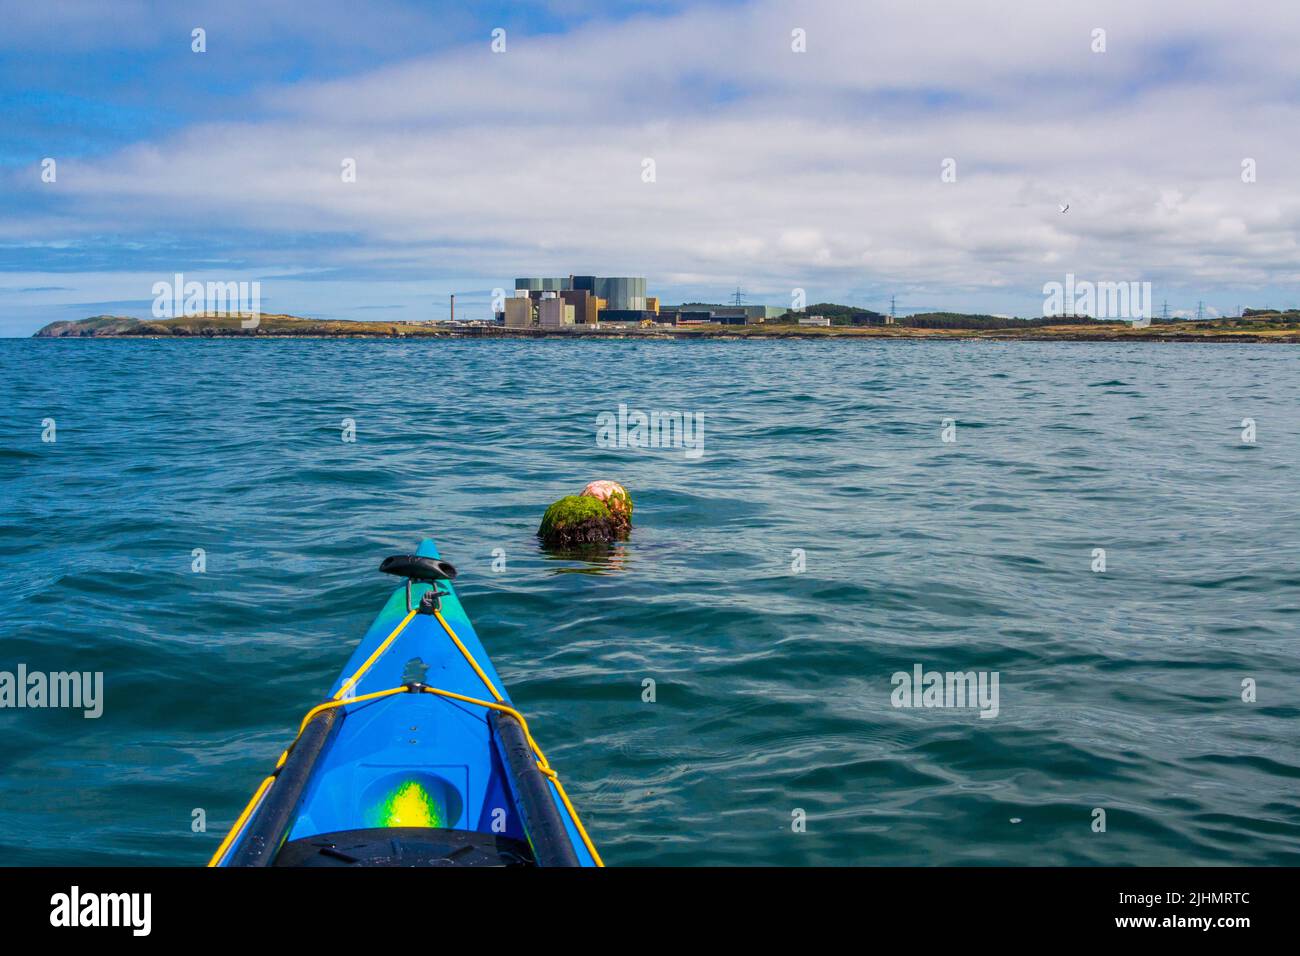 Sea kayaking / canoeing on the coast of Anglesey, North Wales, UK Stock Photo